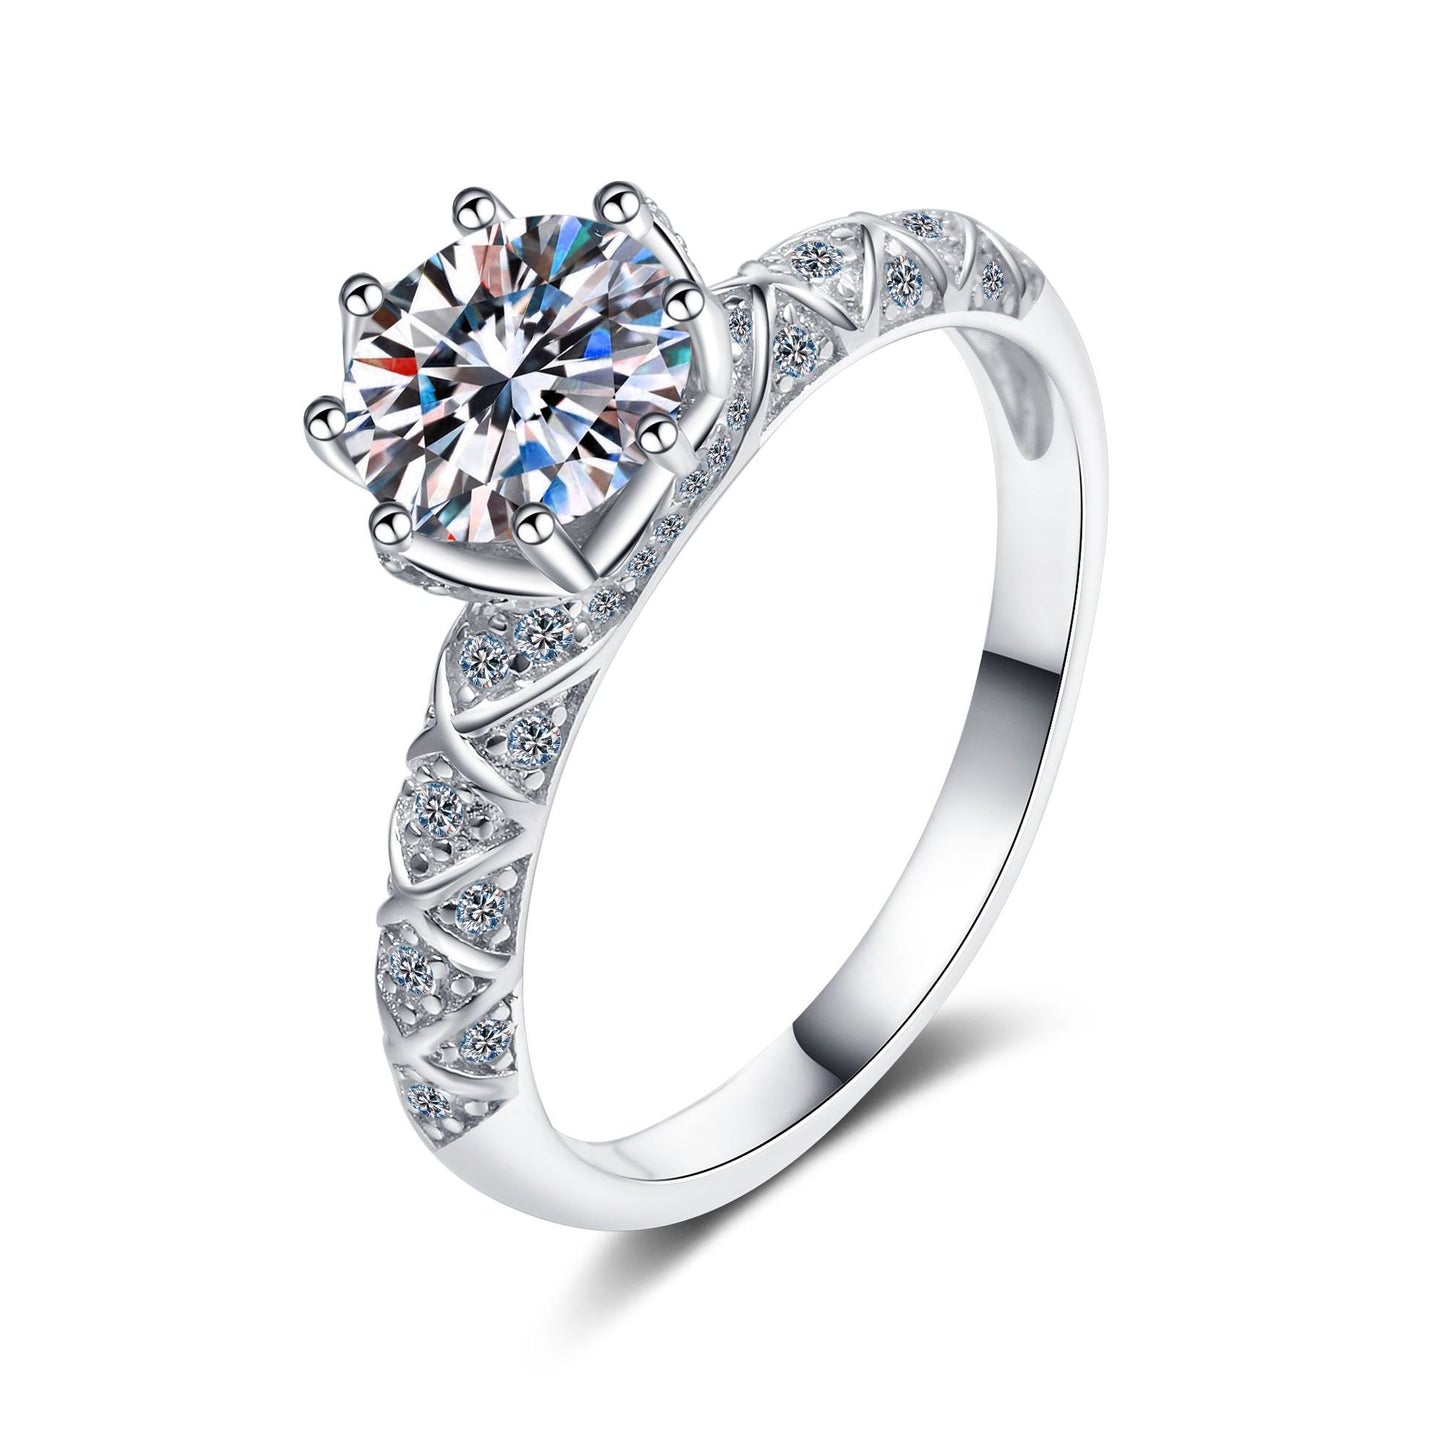 Fashionable eight-claw style S925 sterling silver inlaid with moissanite ring #MR00035